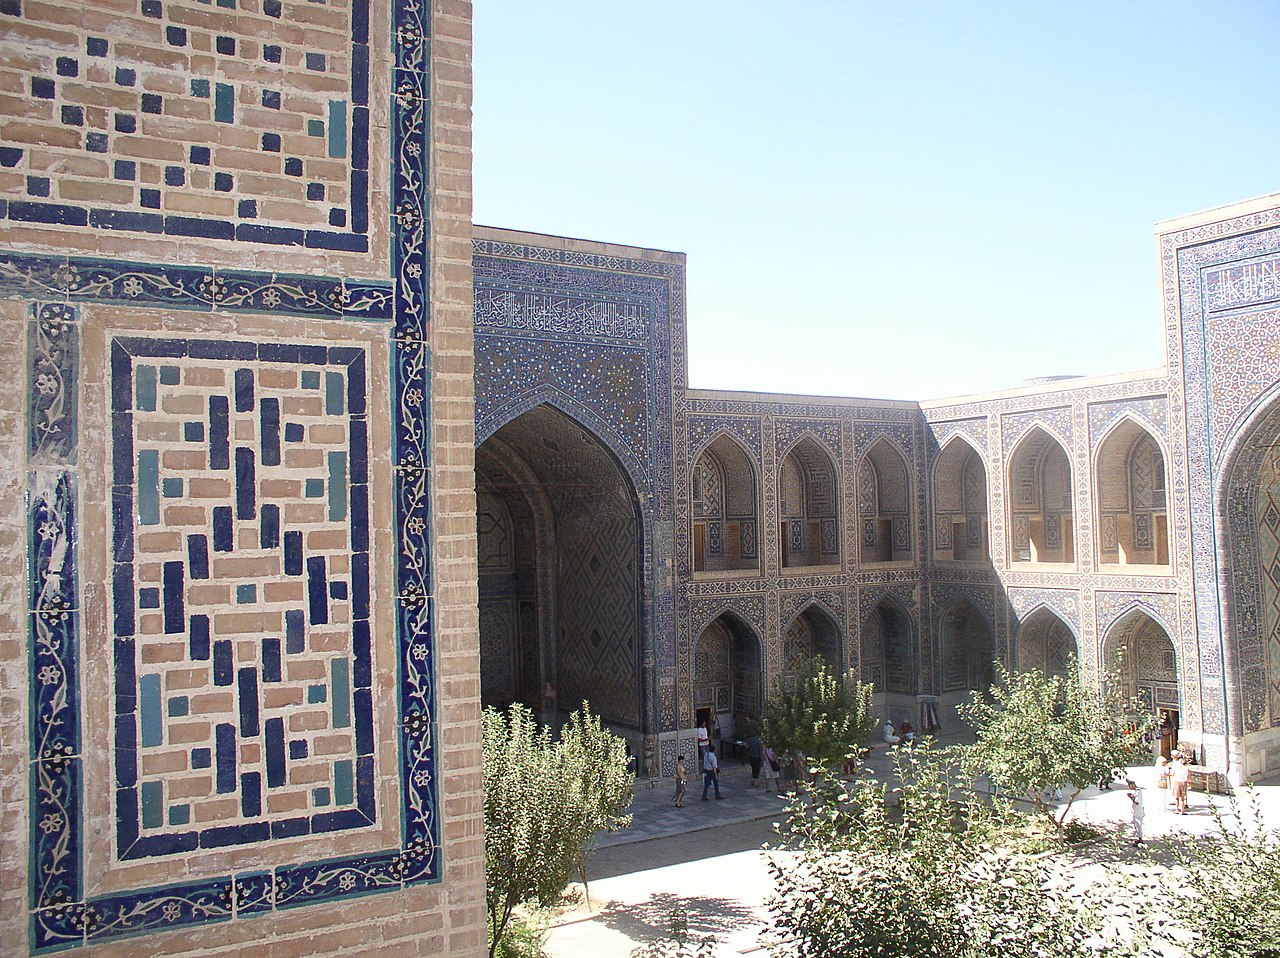 <p>Samarkand has been of the most beautiful cities in the world ever since the conquerer Timur/Tamerlane made it his capital in the 14th century. Must sees include Registan Square, Timur's Mausoleum Gur-e-Amir, and the stunning Bibi-Khanym Mosque.</p>